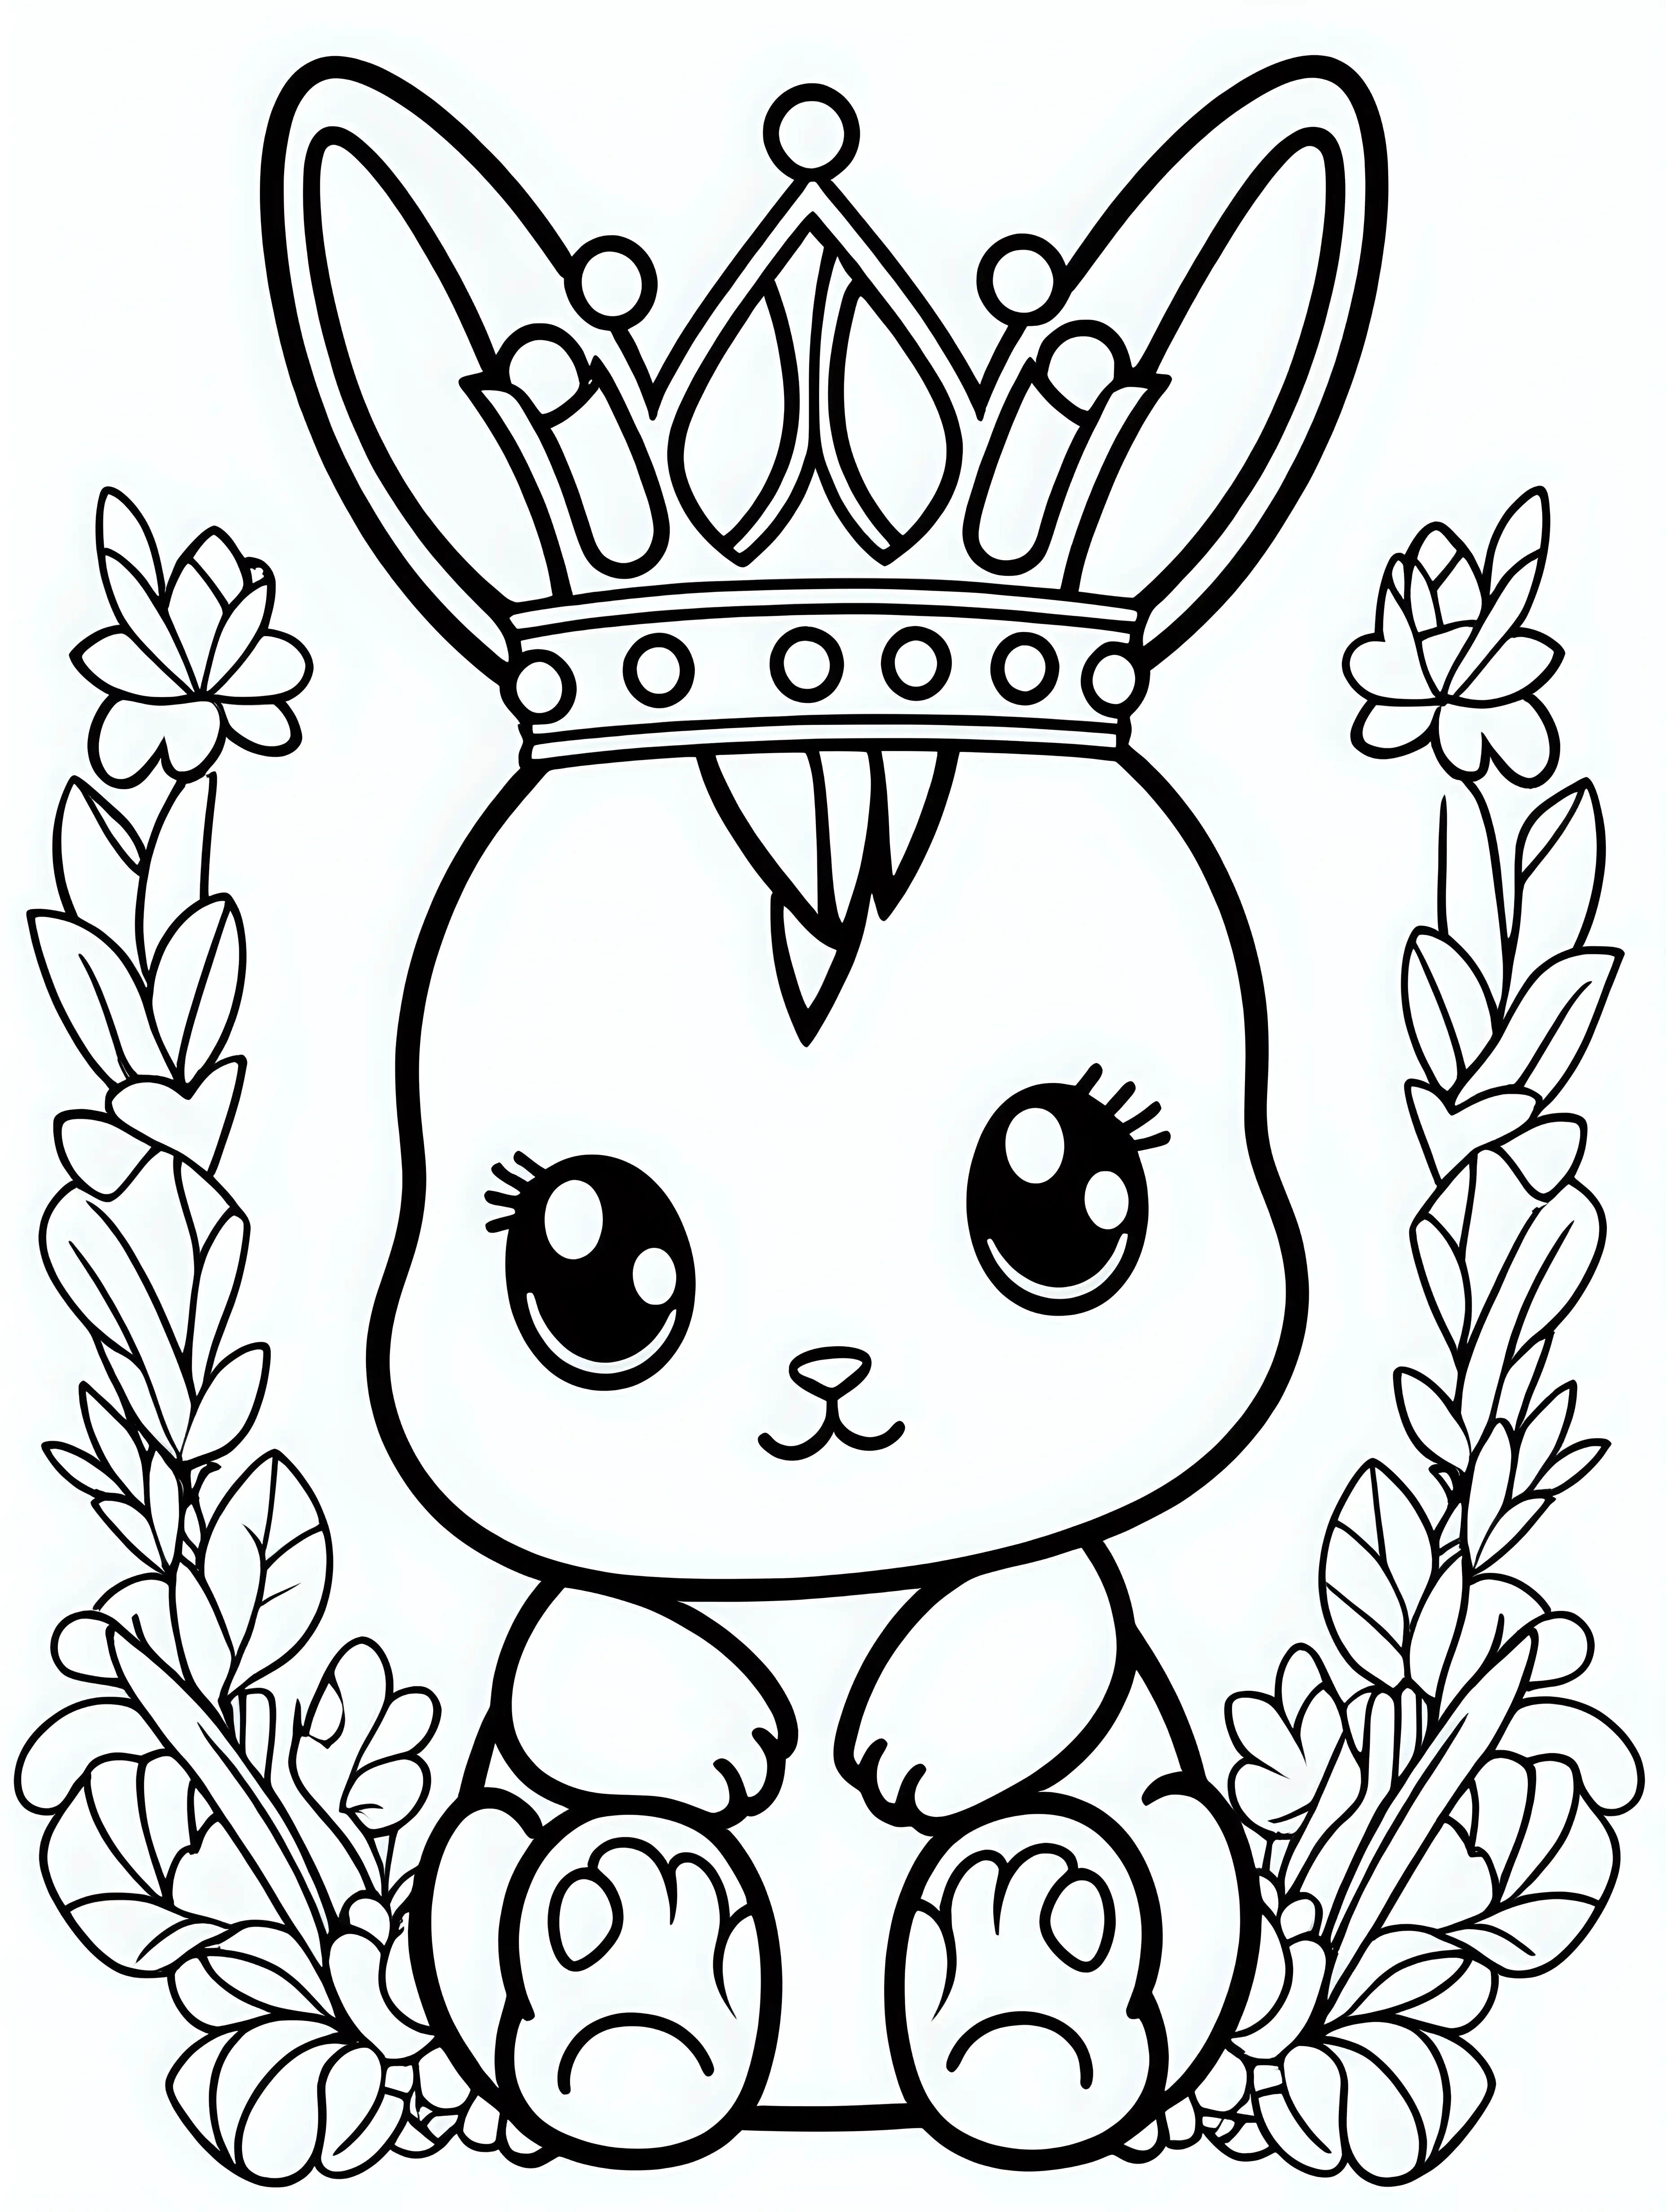 coloring page for kids cute kawaii bunny with a crown on the head, black lines, white background